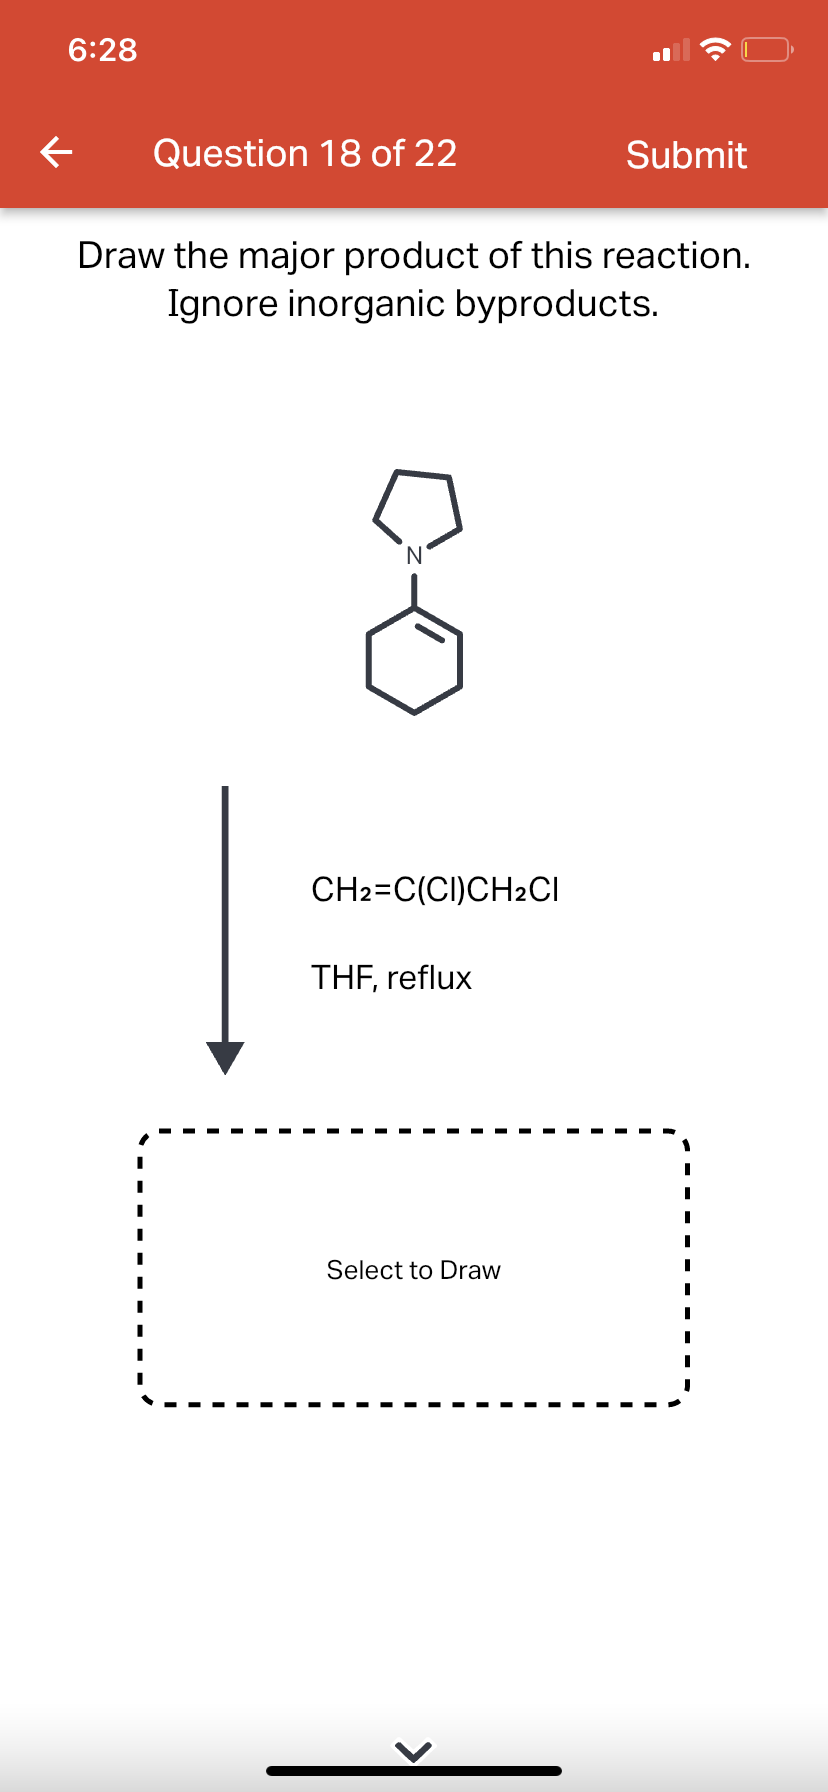 6:28
←
Question 18 of 22
Draw the major product of this reaction.
Ignore inorganic byproducts.
CH2=C(CI)CH2CI
THF, reflux
Submit
Select to Draw